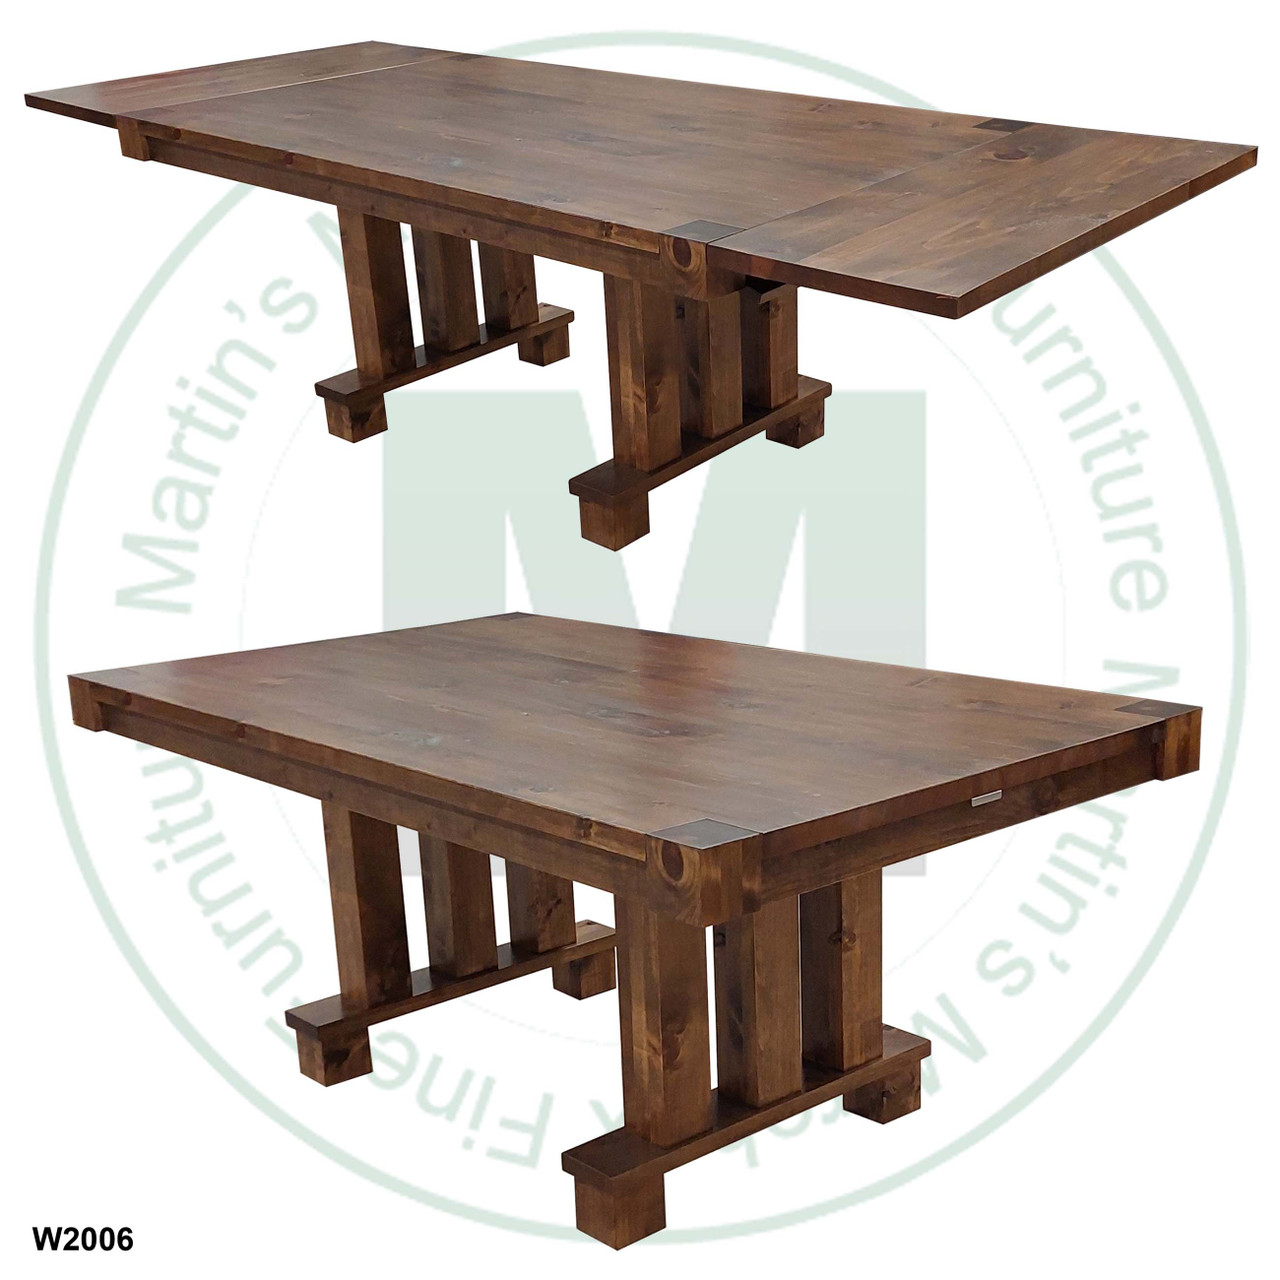 Maple Backwoods Solid Top Pedestal Table 48''D x 84''W x 30''H With 2 - 18'' Leaves